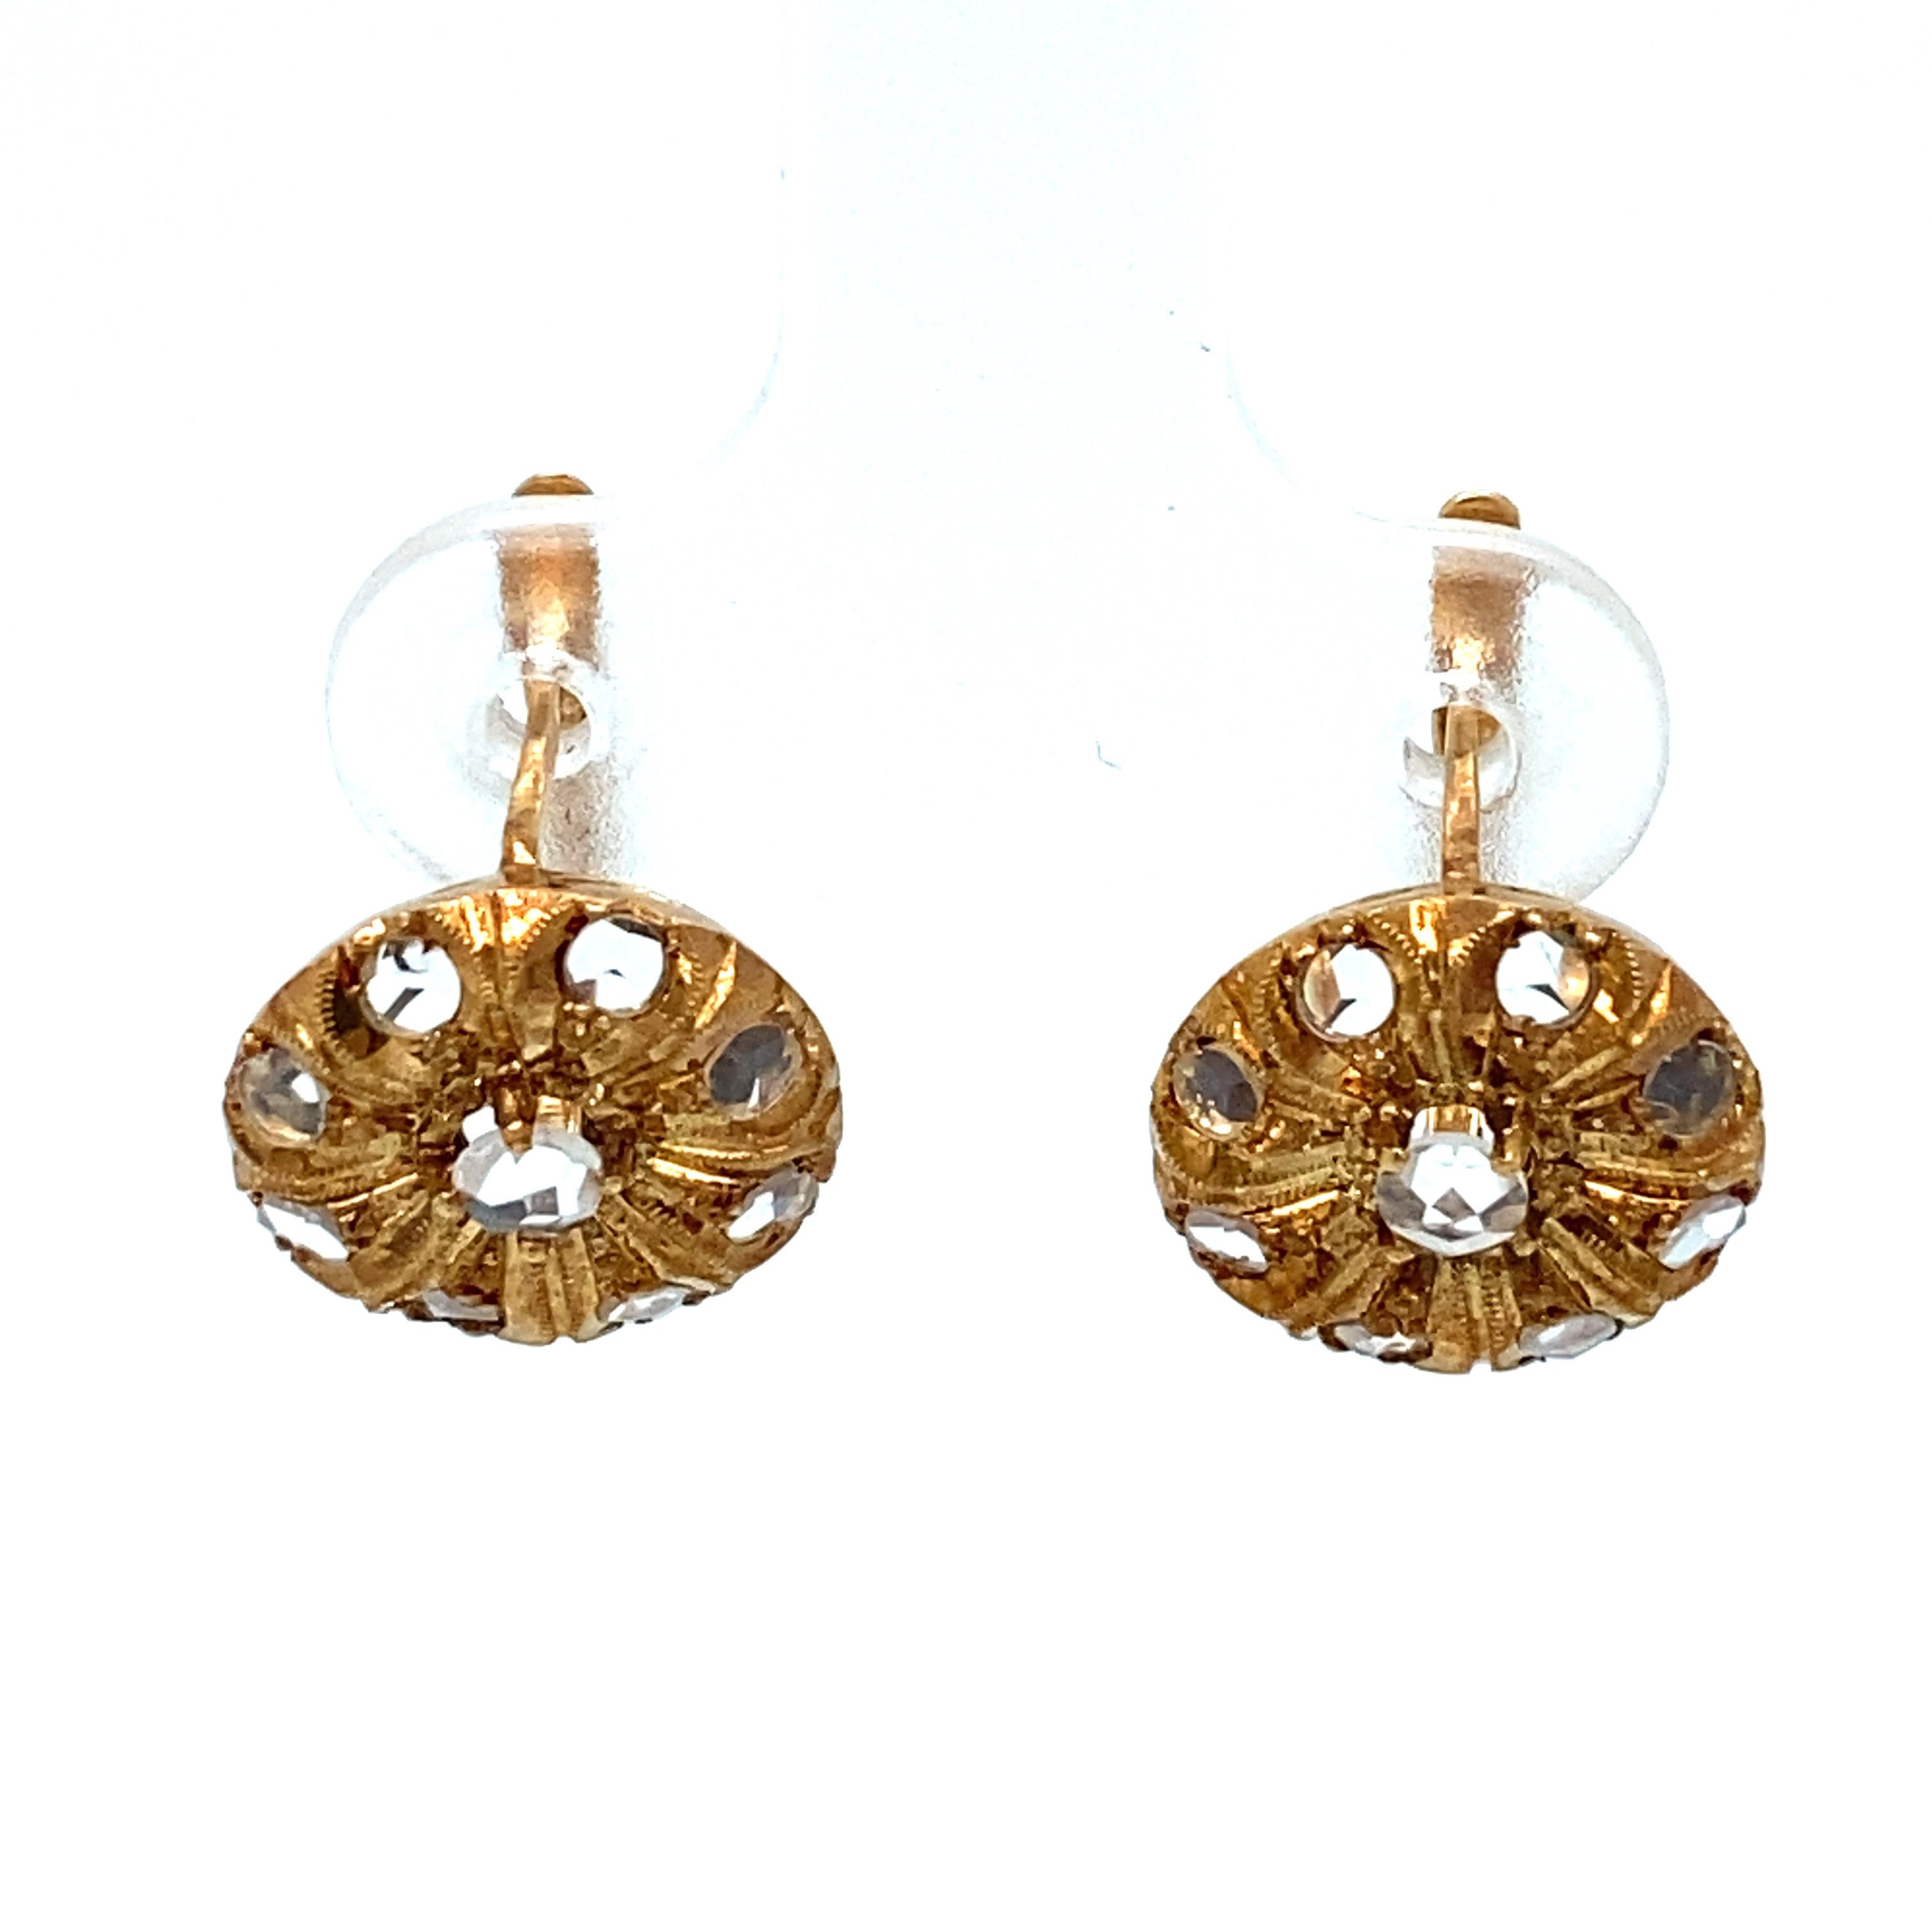 Item Details: These antique earrings have a unique Art Deco design with rose cut diamonds in a lever-back dangle design. Absolutely beautiful true era and exquisite earrings for your antique collection!

Circa: 1930s
Metal Type:  14 Karat Yellow